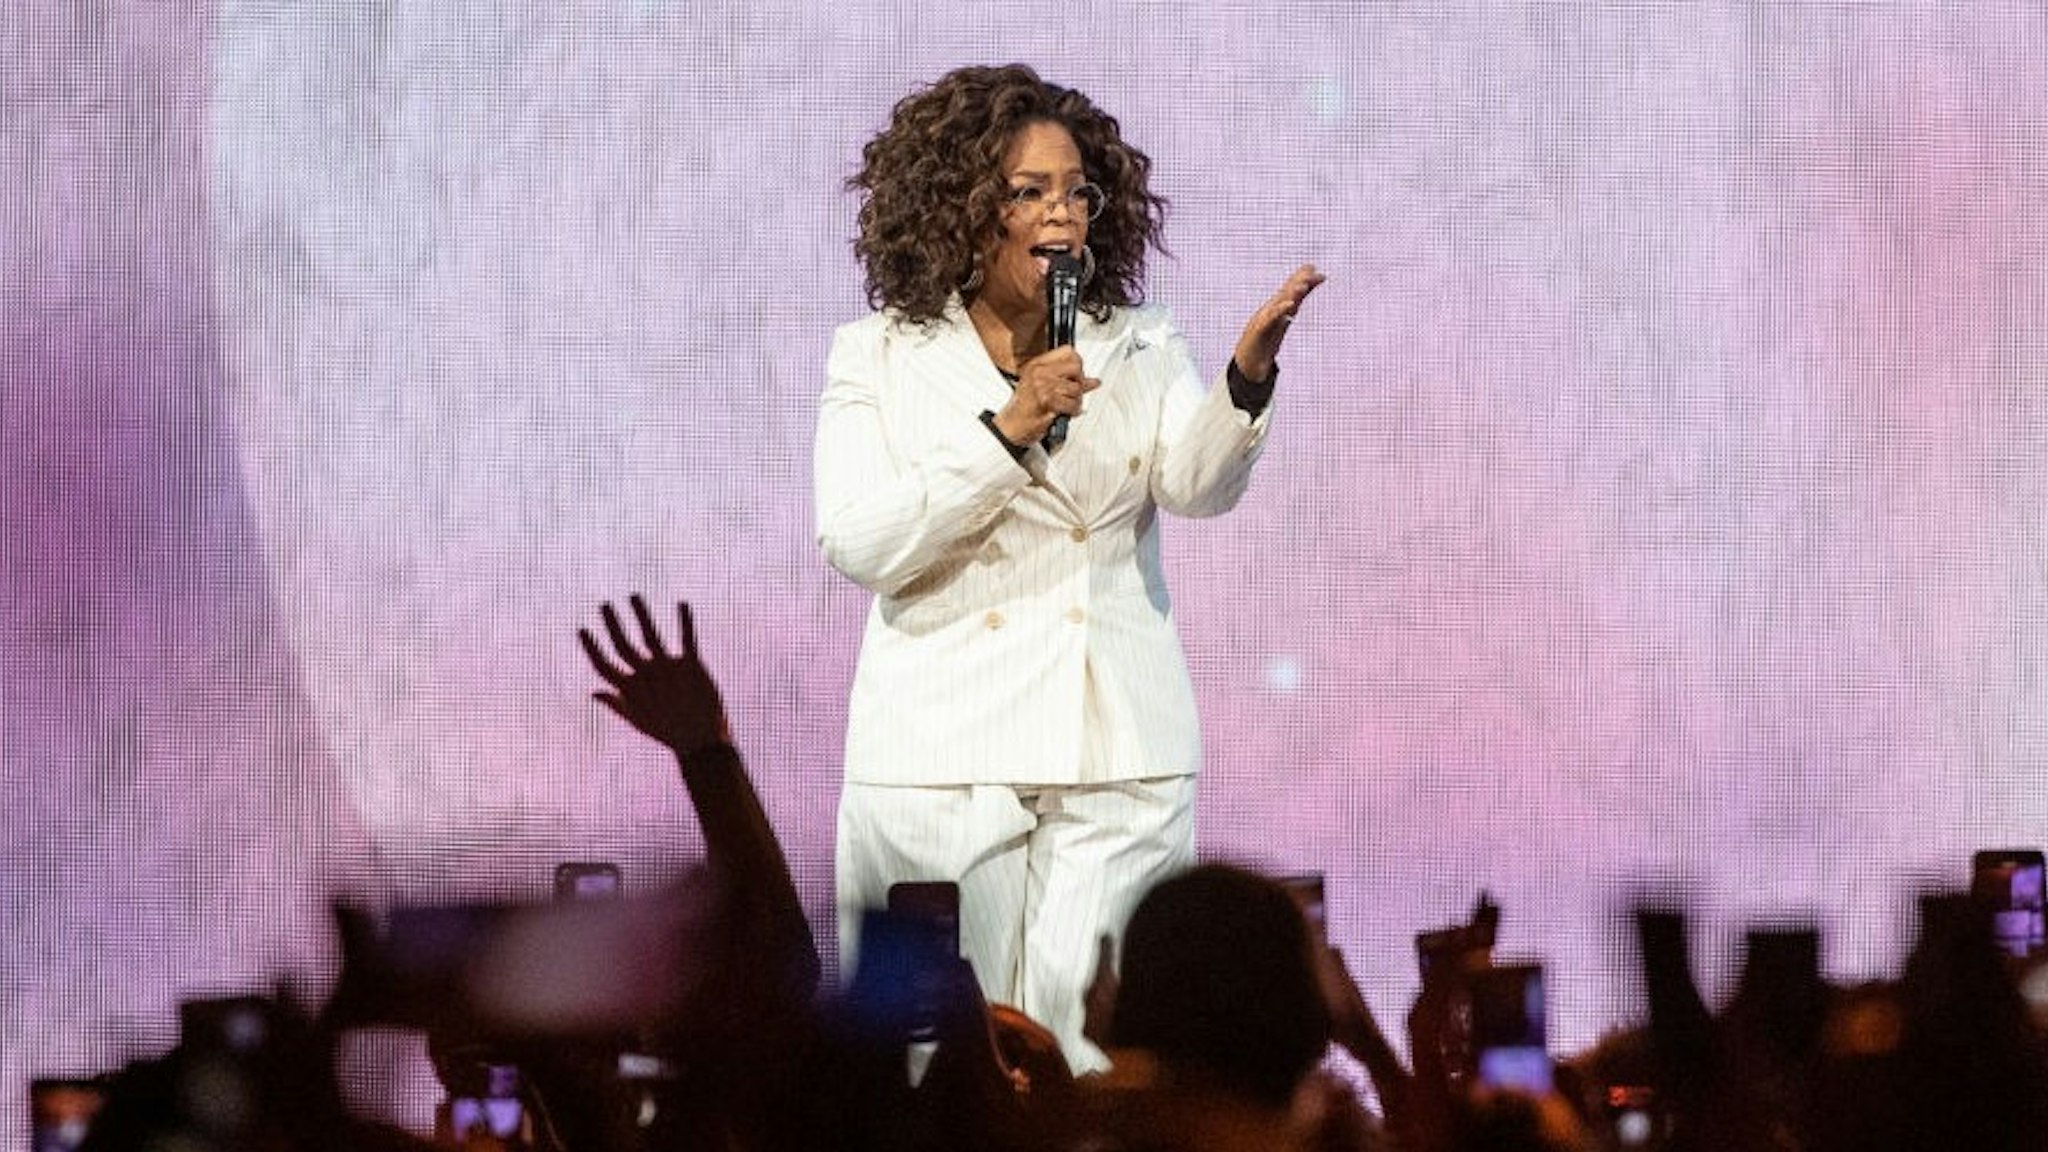 INGLEWOOD, CALIFORNIA - FEBRUARY 29: Oprah speaks onstage during 'Oprah's 2020 Vision: Your Life in Focus Tour' presented by WW (Weight Watchers Reimagined) at The Forum on February 29, 2020 in Inglewood, California. (Photo by